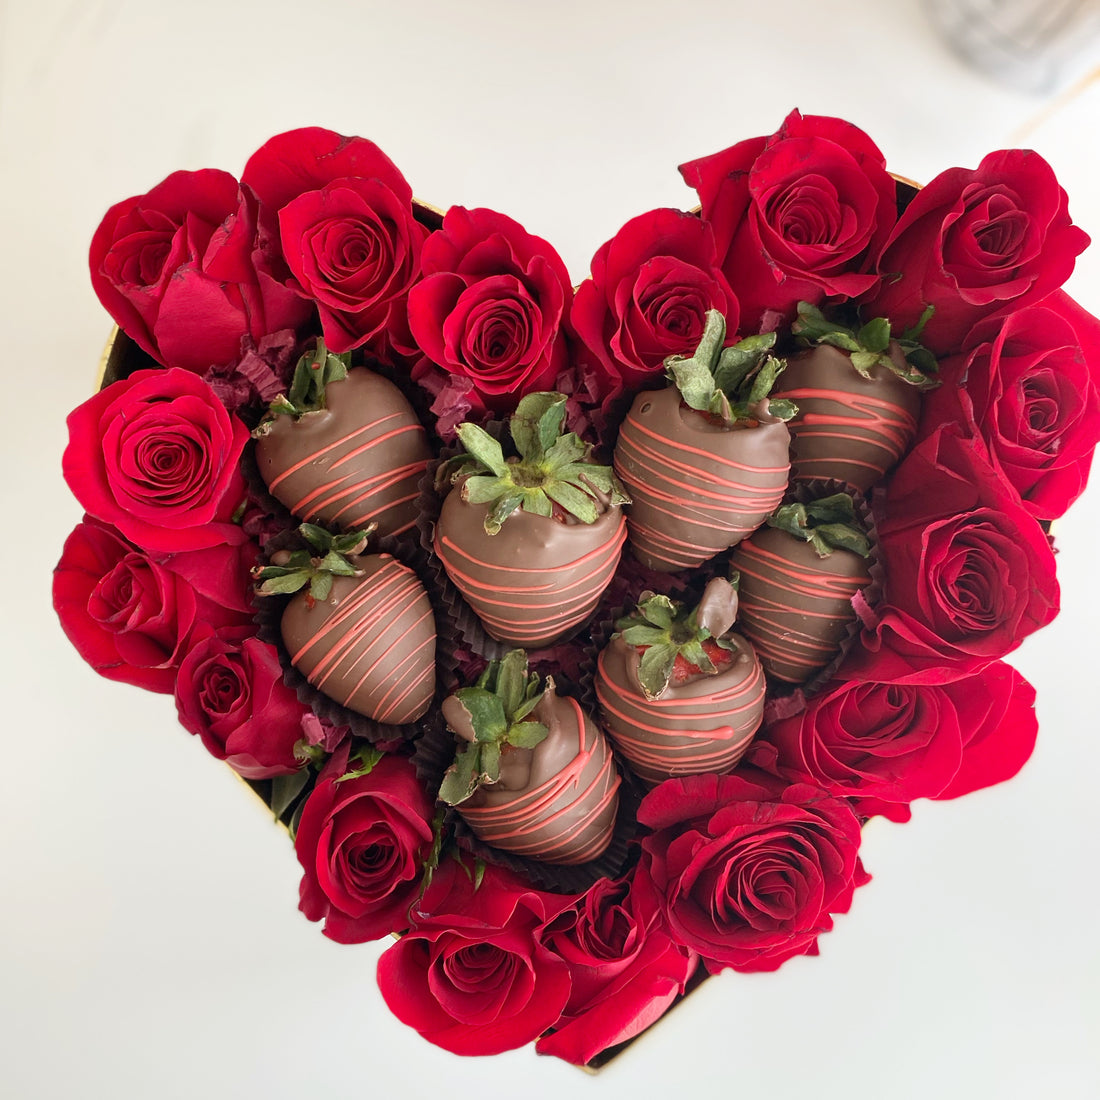 Roses and Chocolate Strawberries in Heart